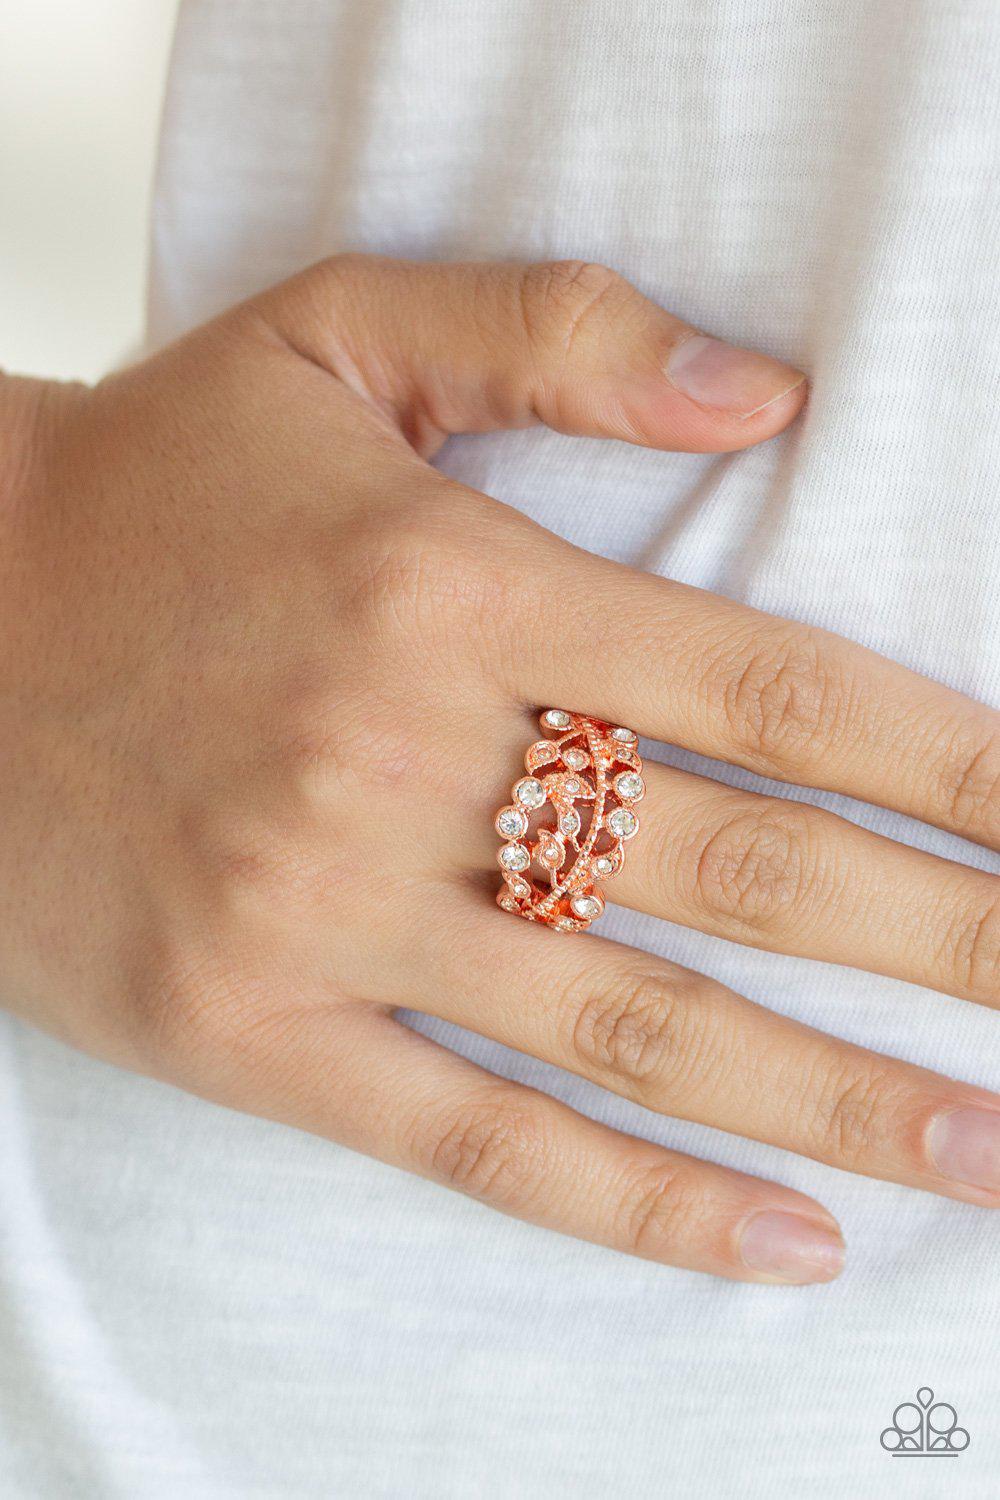 Bling Swing Copper and White Rhinestone Ring - Paparazzi Accessories-CarasShop.com - $5 Jewelry by Cara Jewels